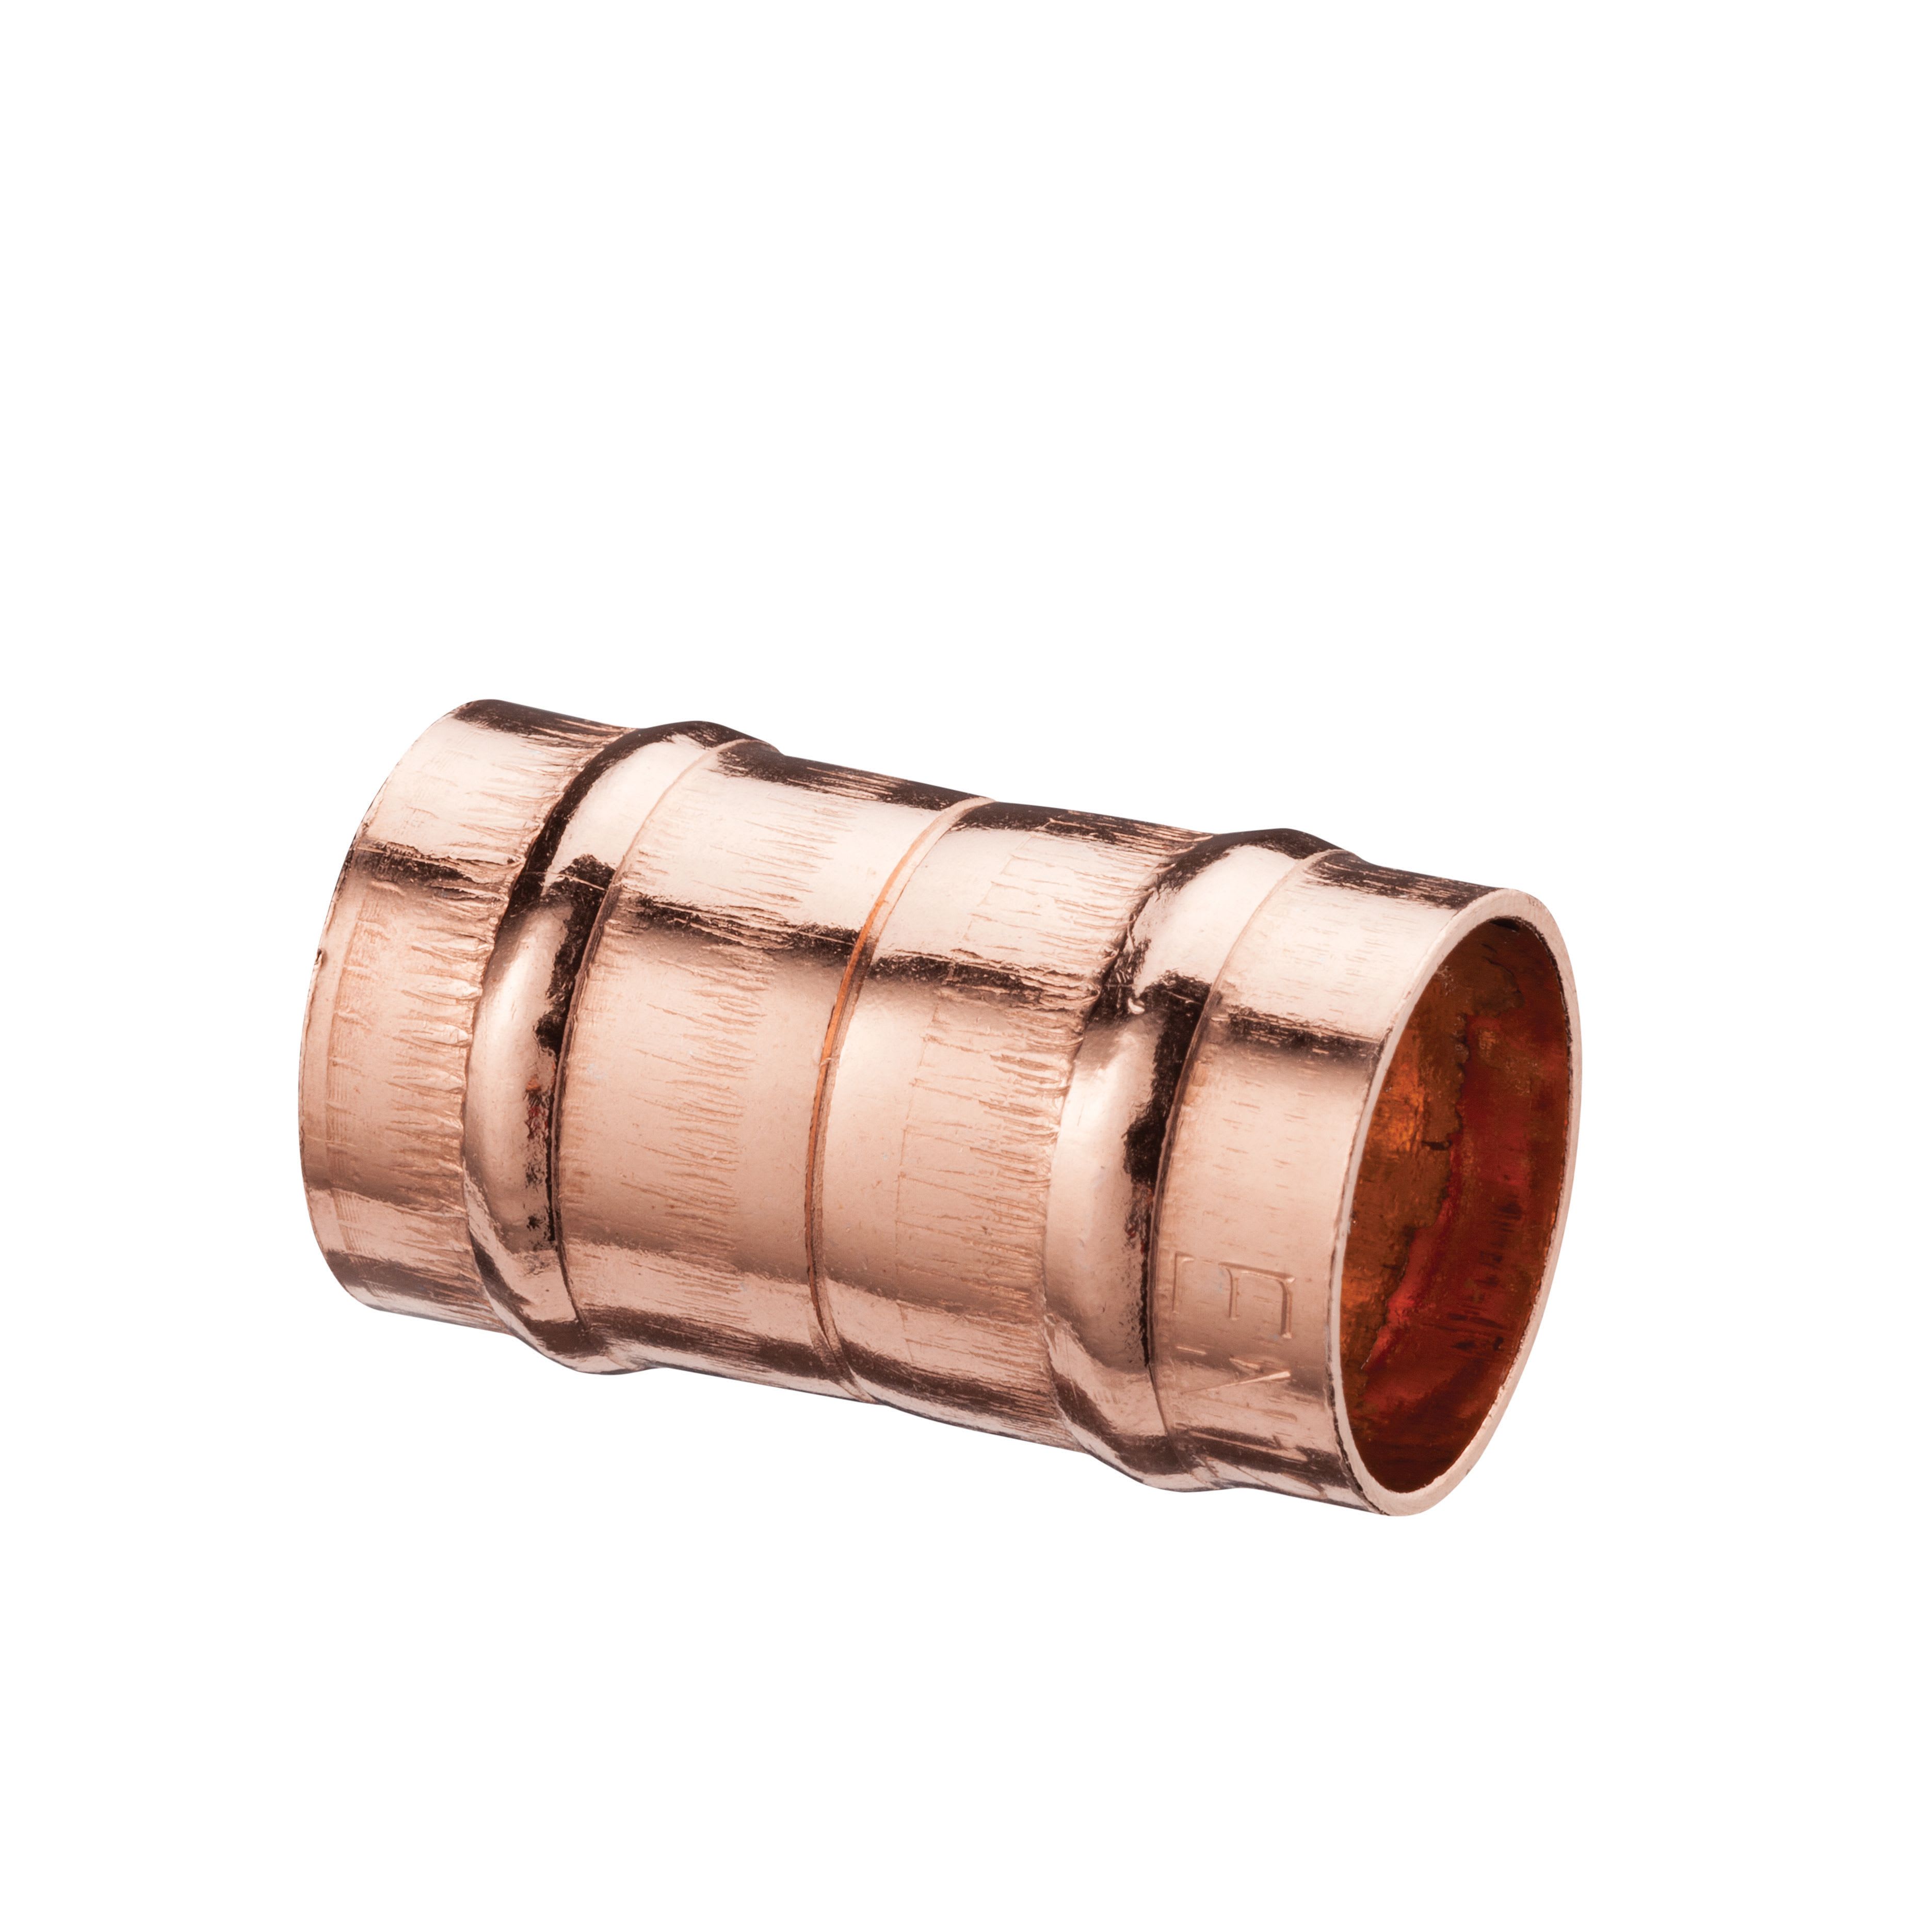 Primaflow Copper Solder Ring Straight Coupling - 22mm